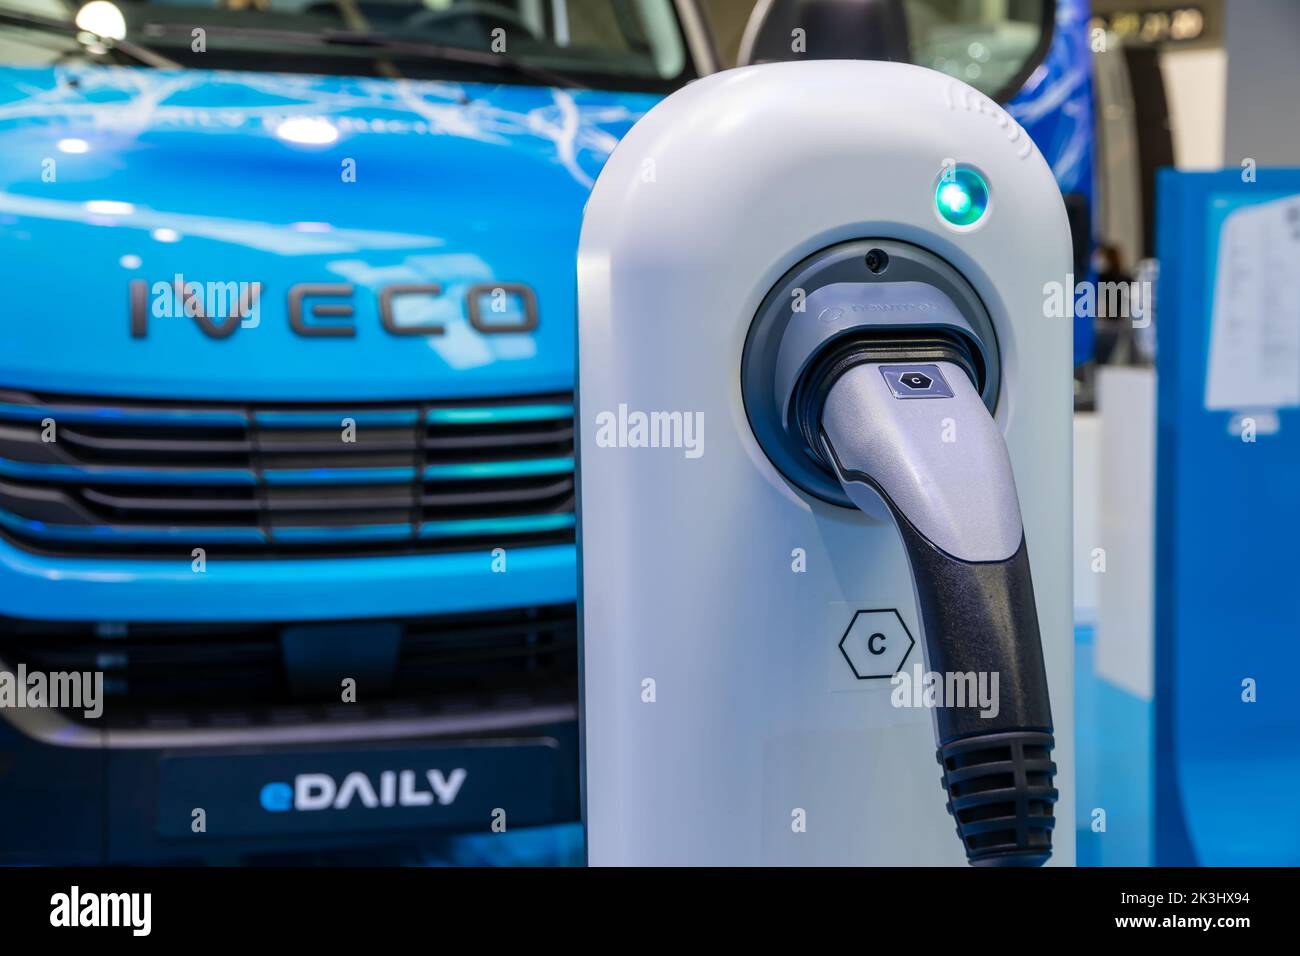 Shell NewMotion electric vehicle charging point in front of the new Iveco eDaily EV transporter van presented at the Hannover IAA Transportation Motor Stock Photo